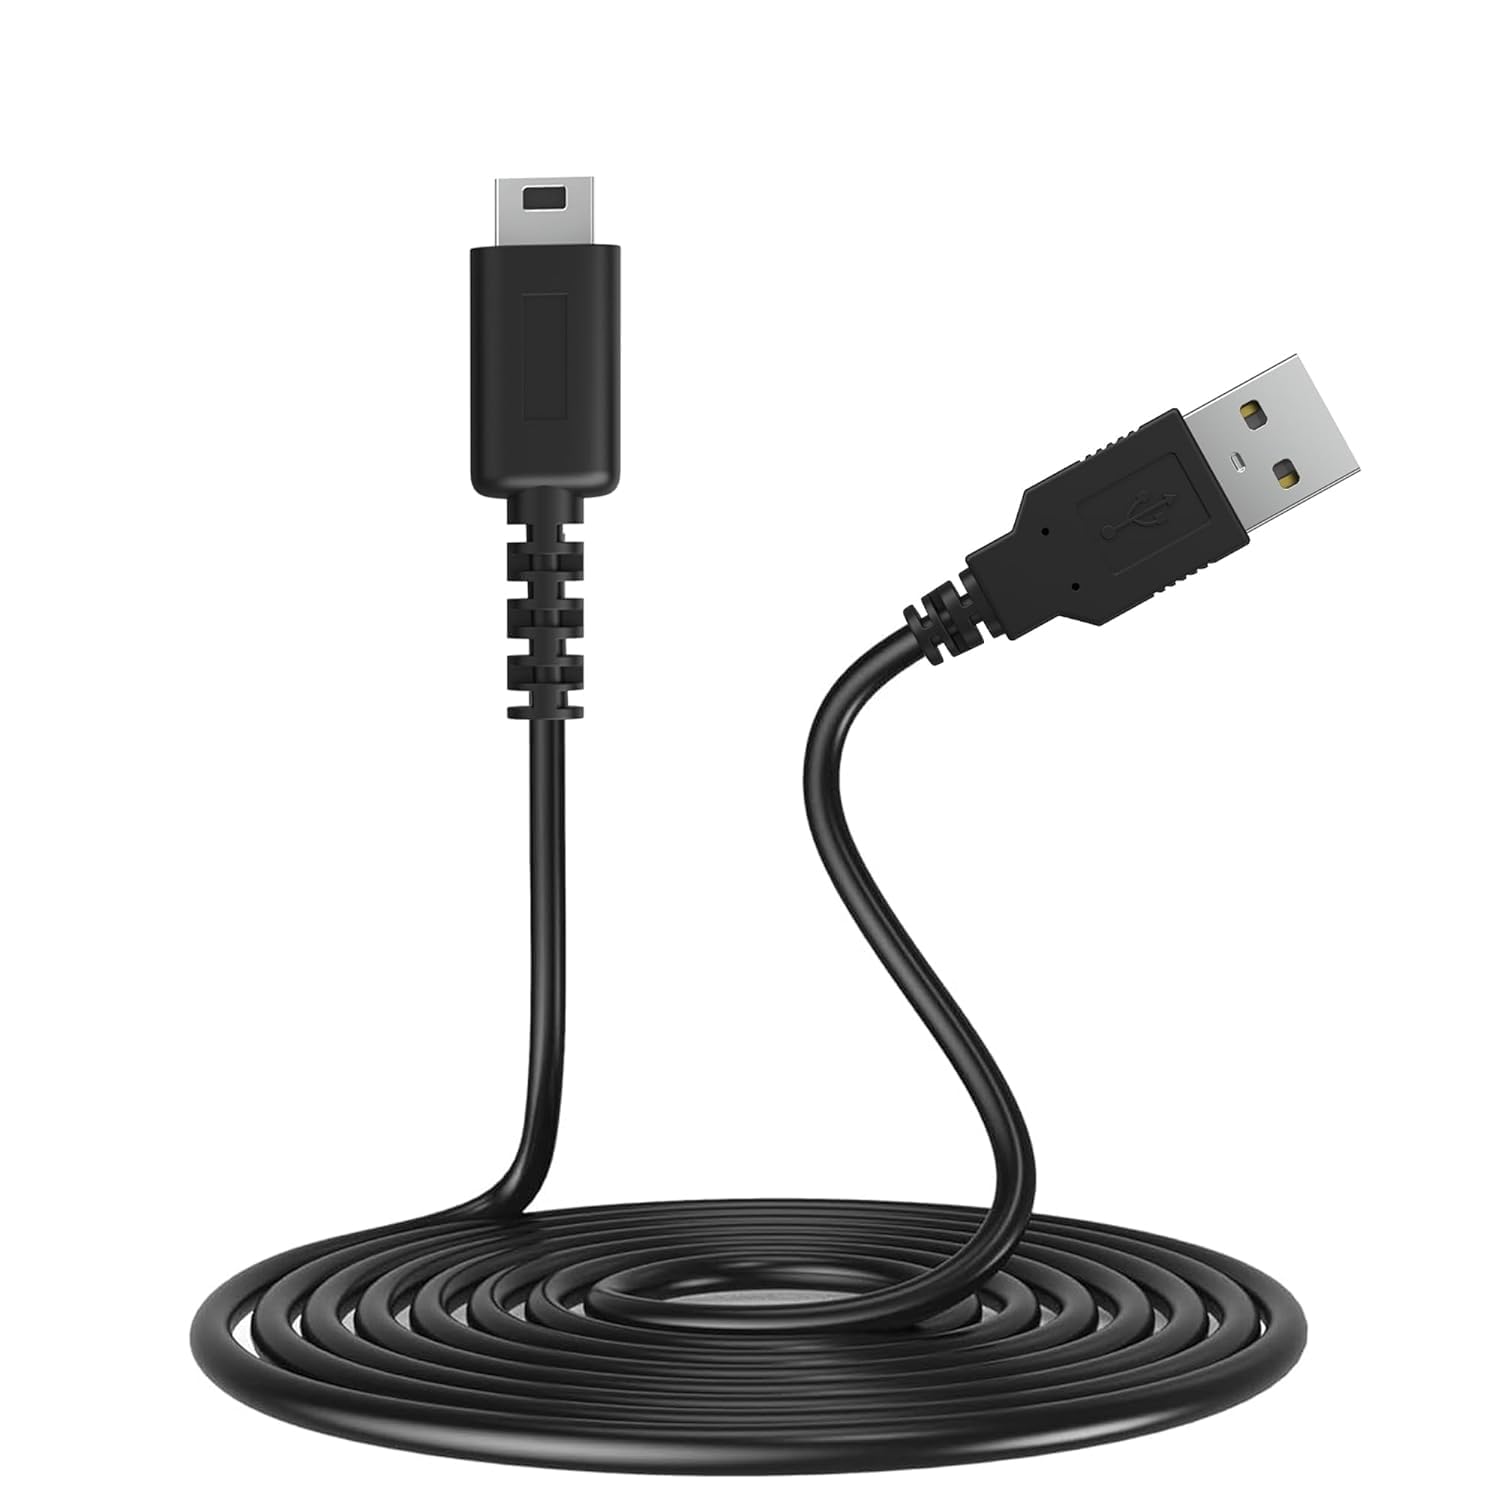 New World DS Lite USB Charger Cable, Power Charging Cord Compatible with Nintendo DS Lite/NDSL, 3.9 ft (ONLY for NDSL, NOT for 3DS, 2DS, DSi, DS)